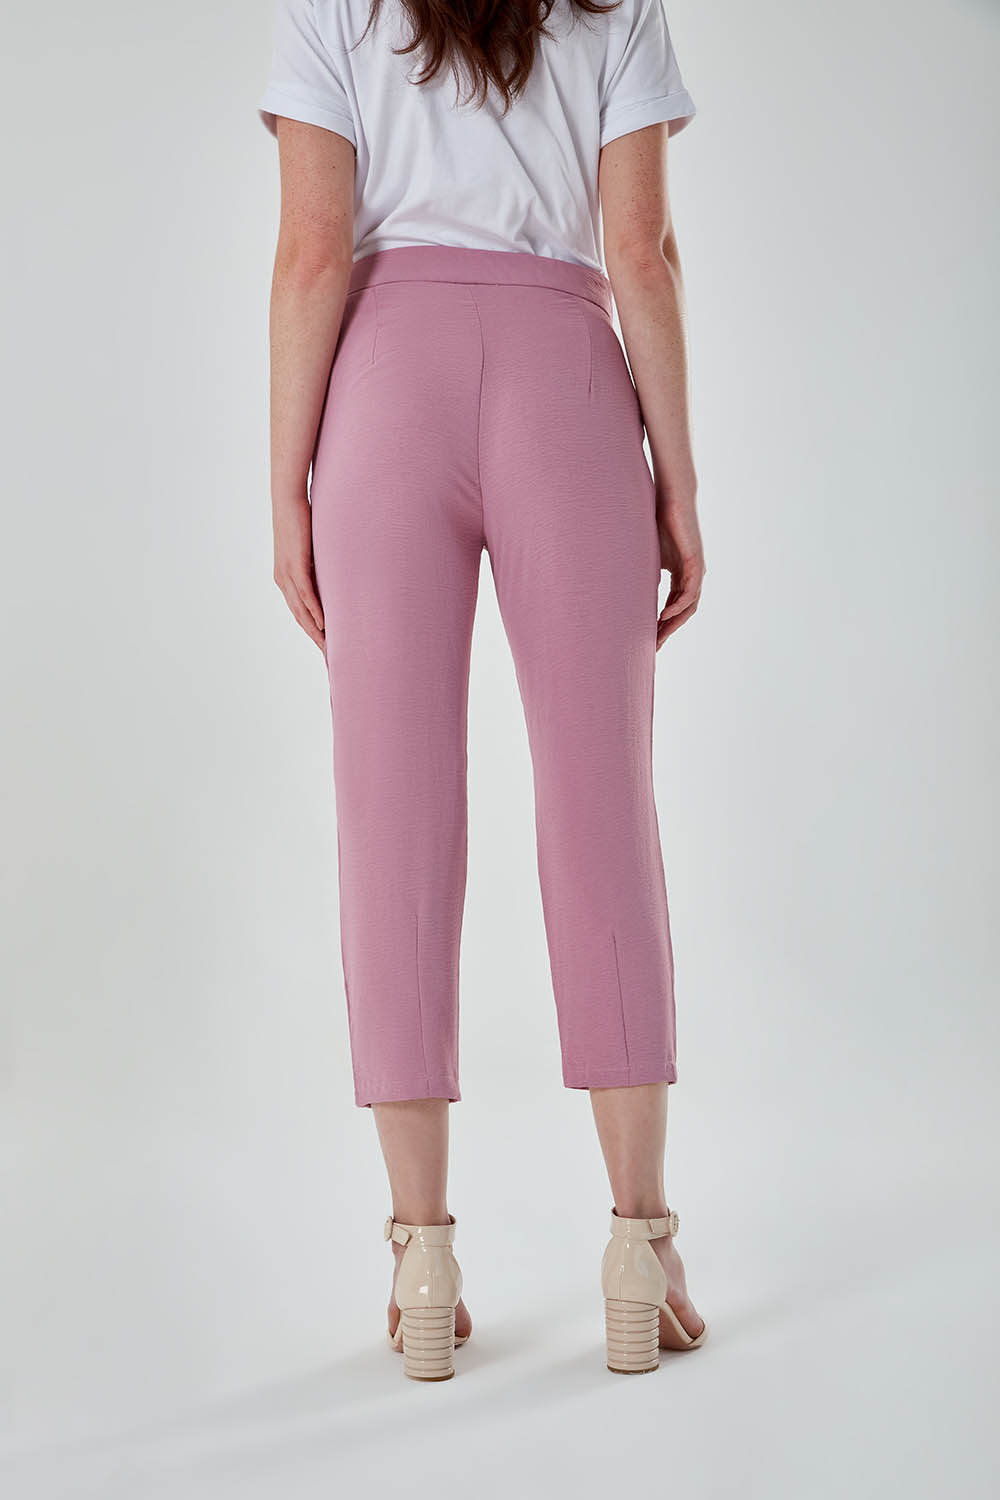 Hem Stitched Dusty Rose Carrot Trousers